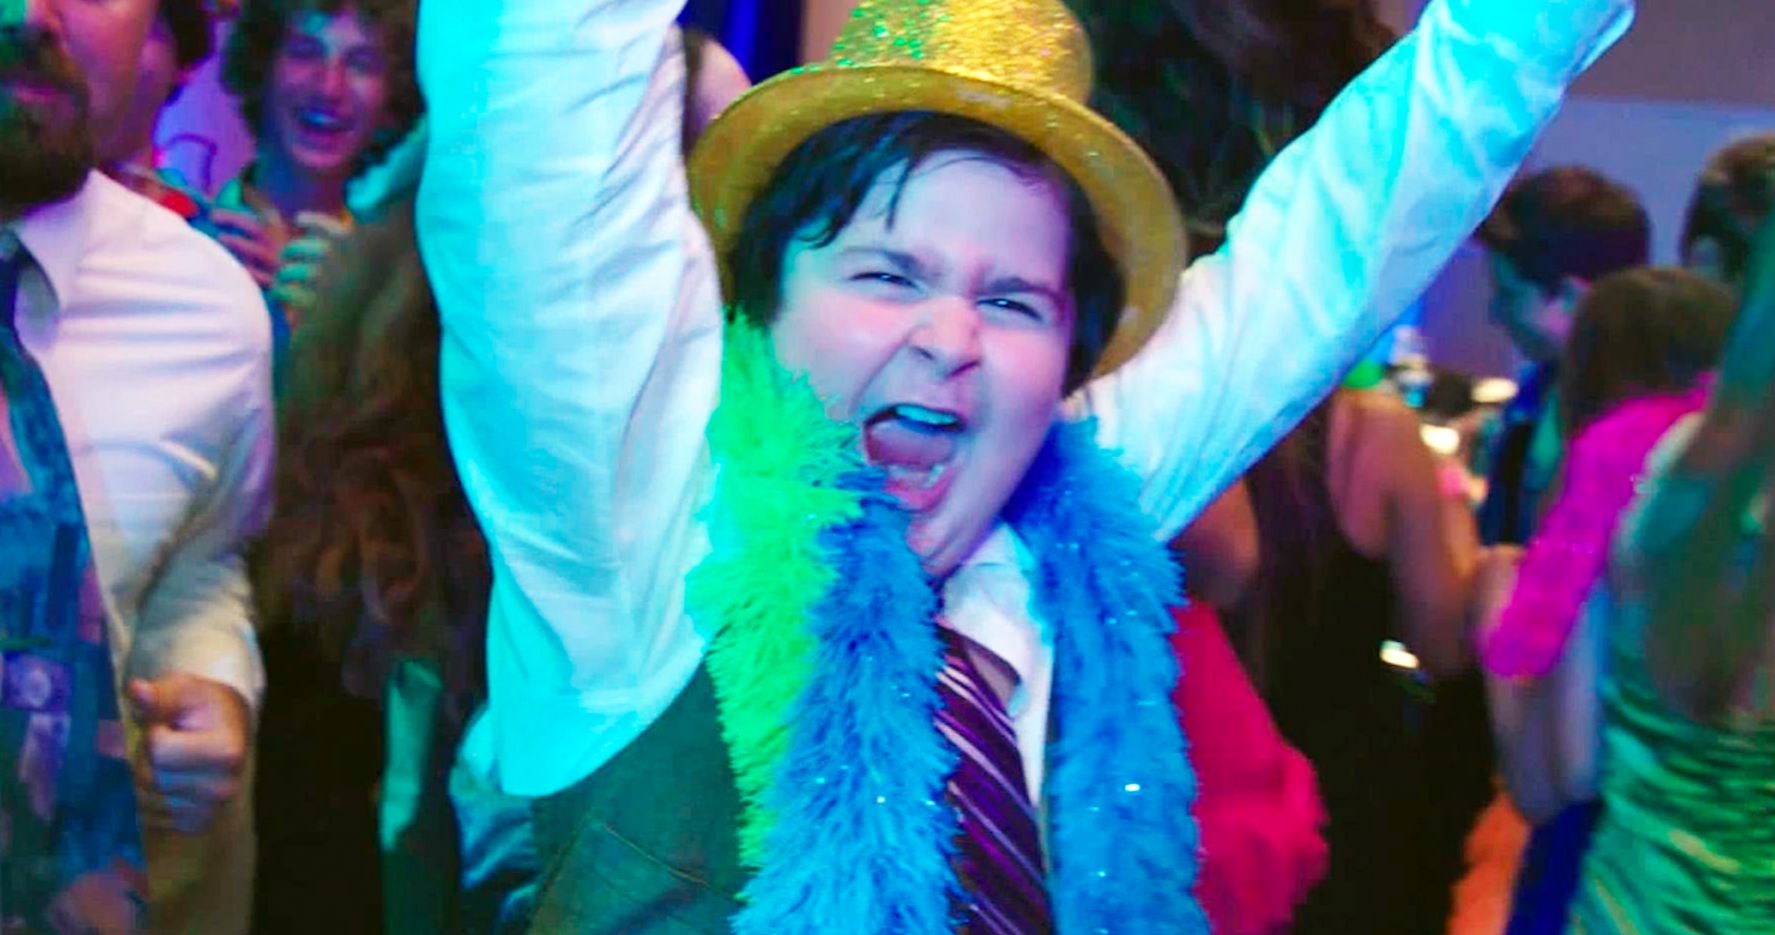 Donny's Bar Mitzvah Sneak Peek Has You Partying Like It's 1998 in the Raunchy Comedy